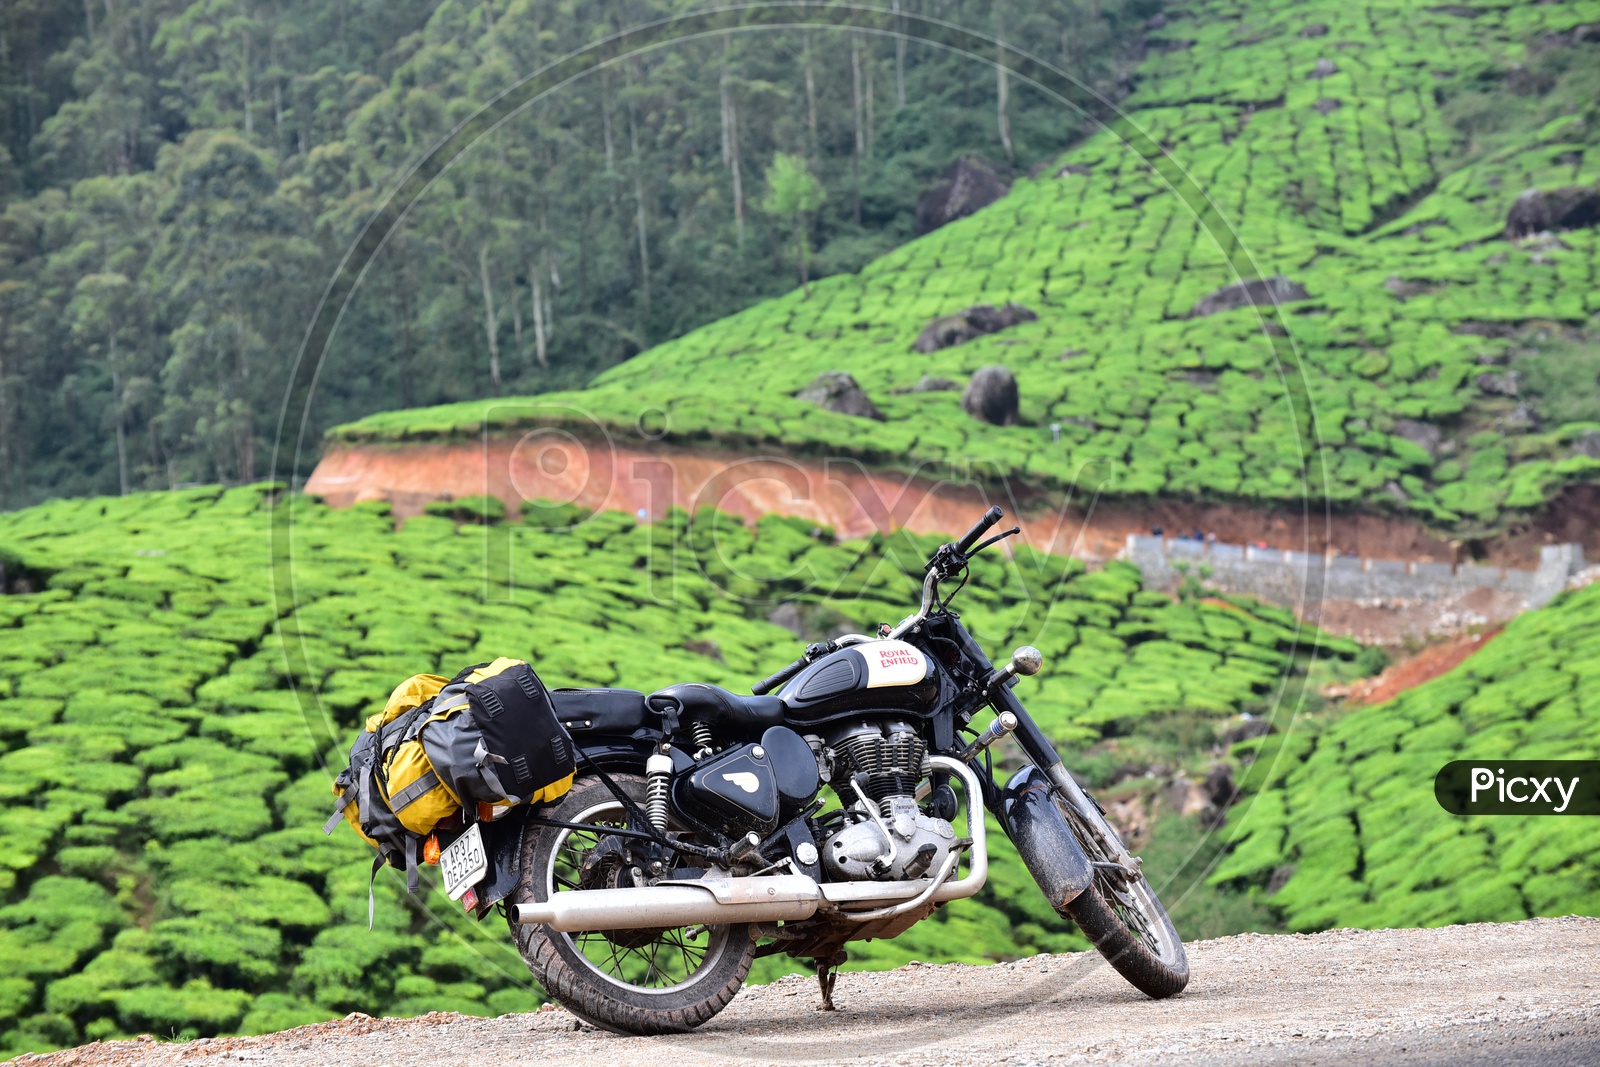 Royal Enfield Classic 350 bike with Munnar mountains in the background